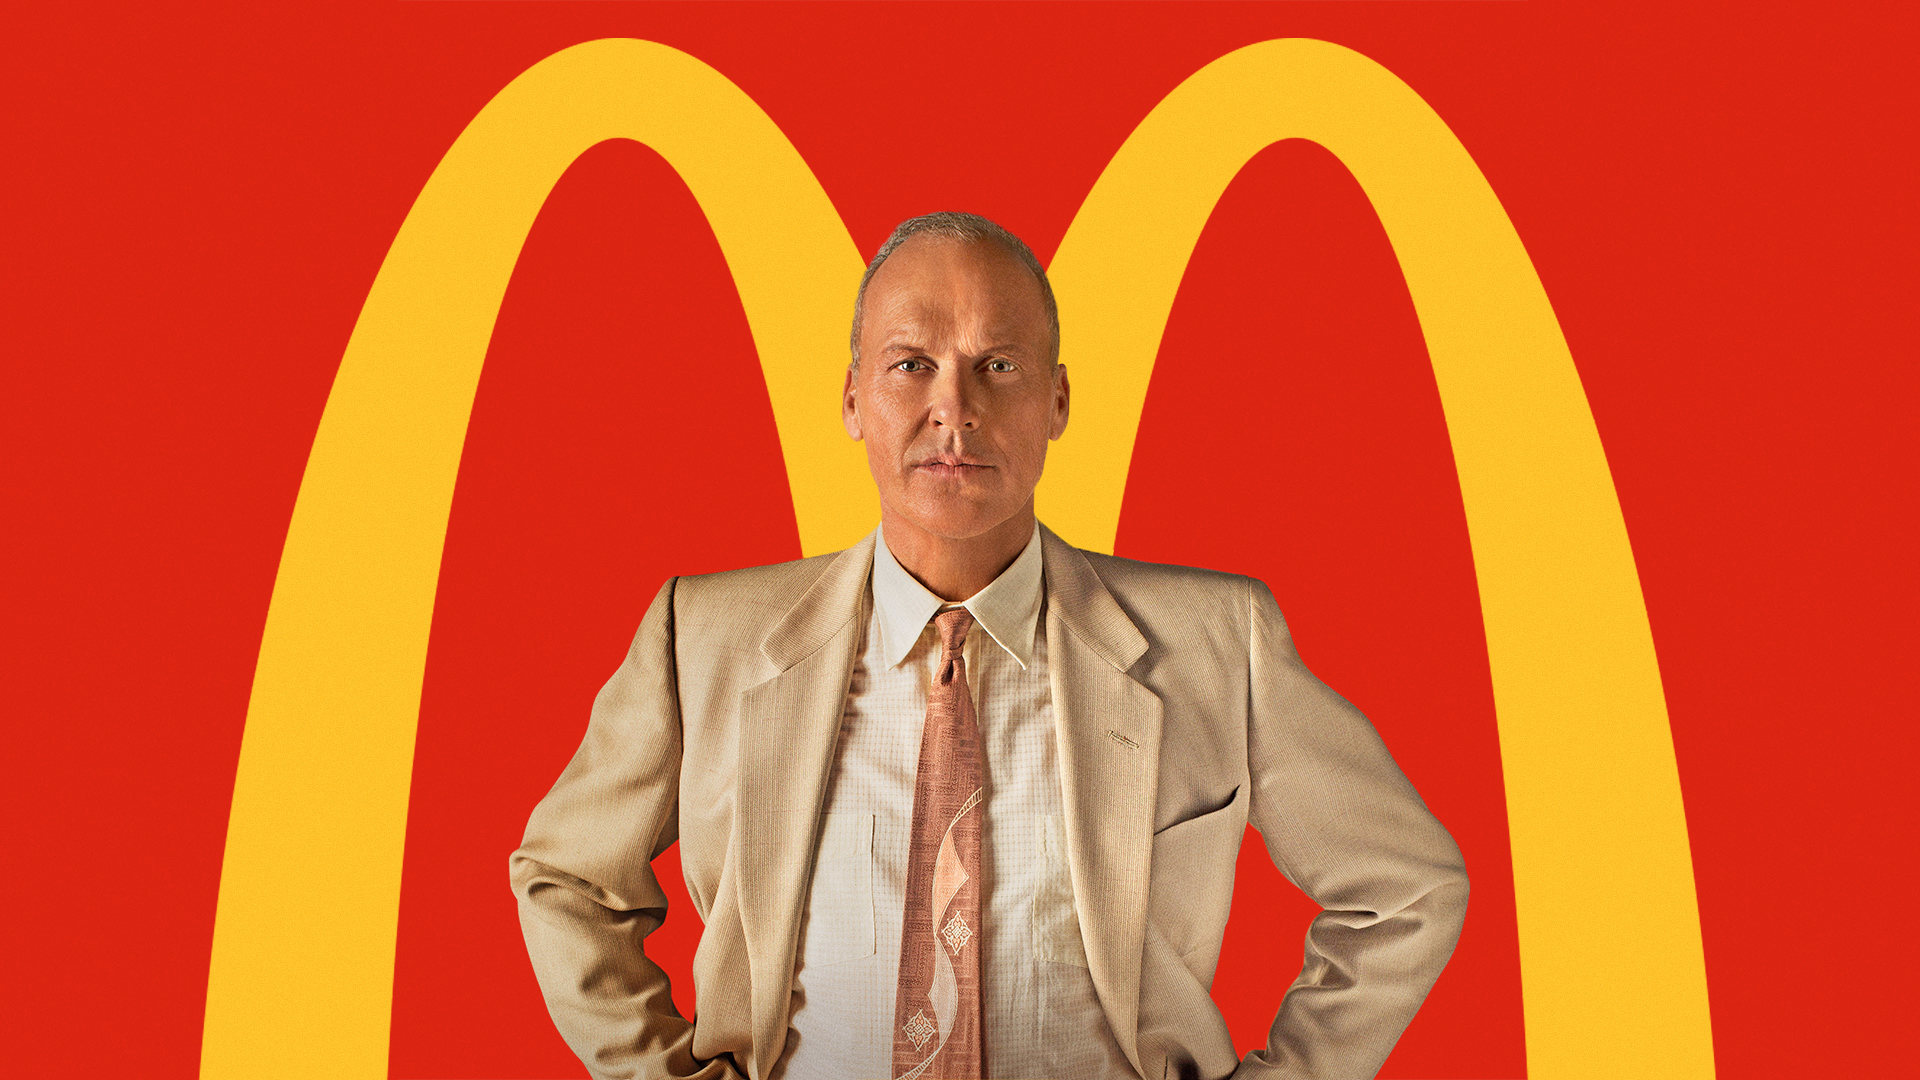 Movie The Founder HD Wallpaper | Background Image